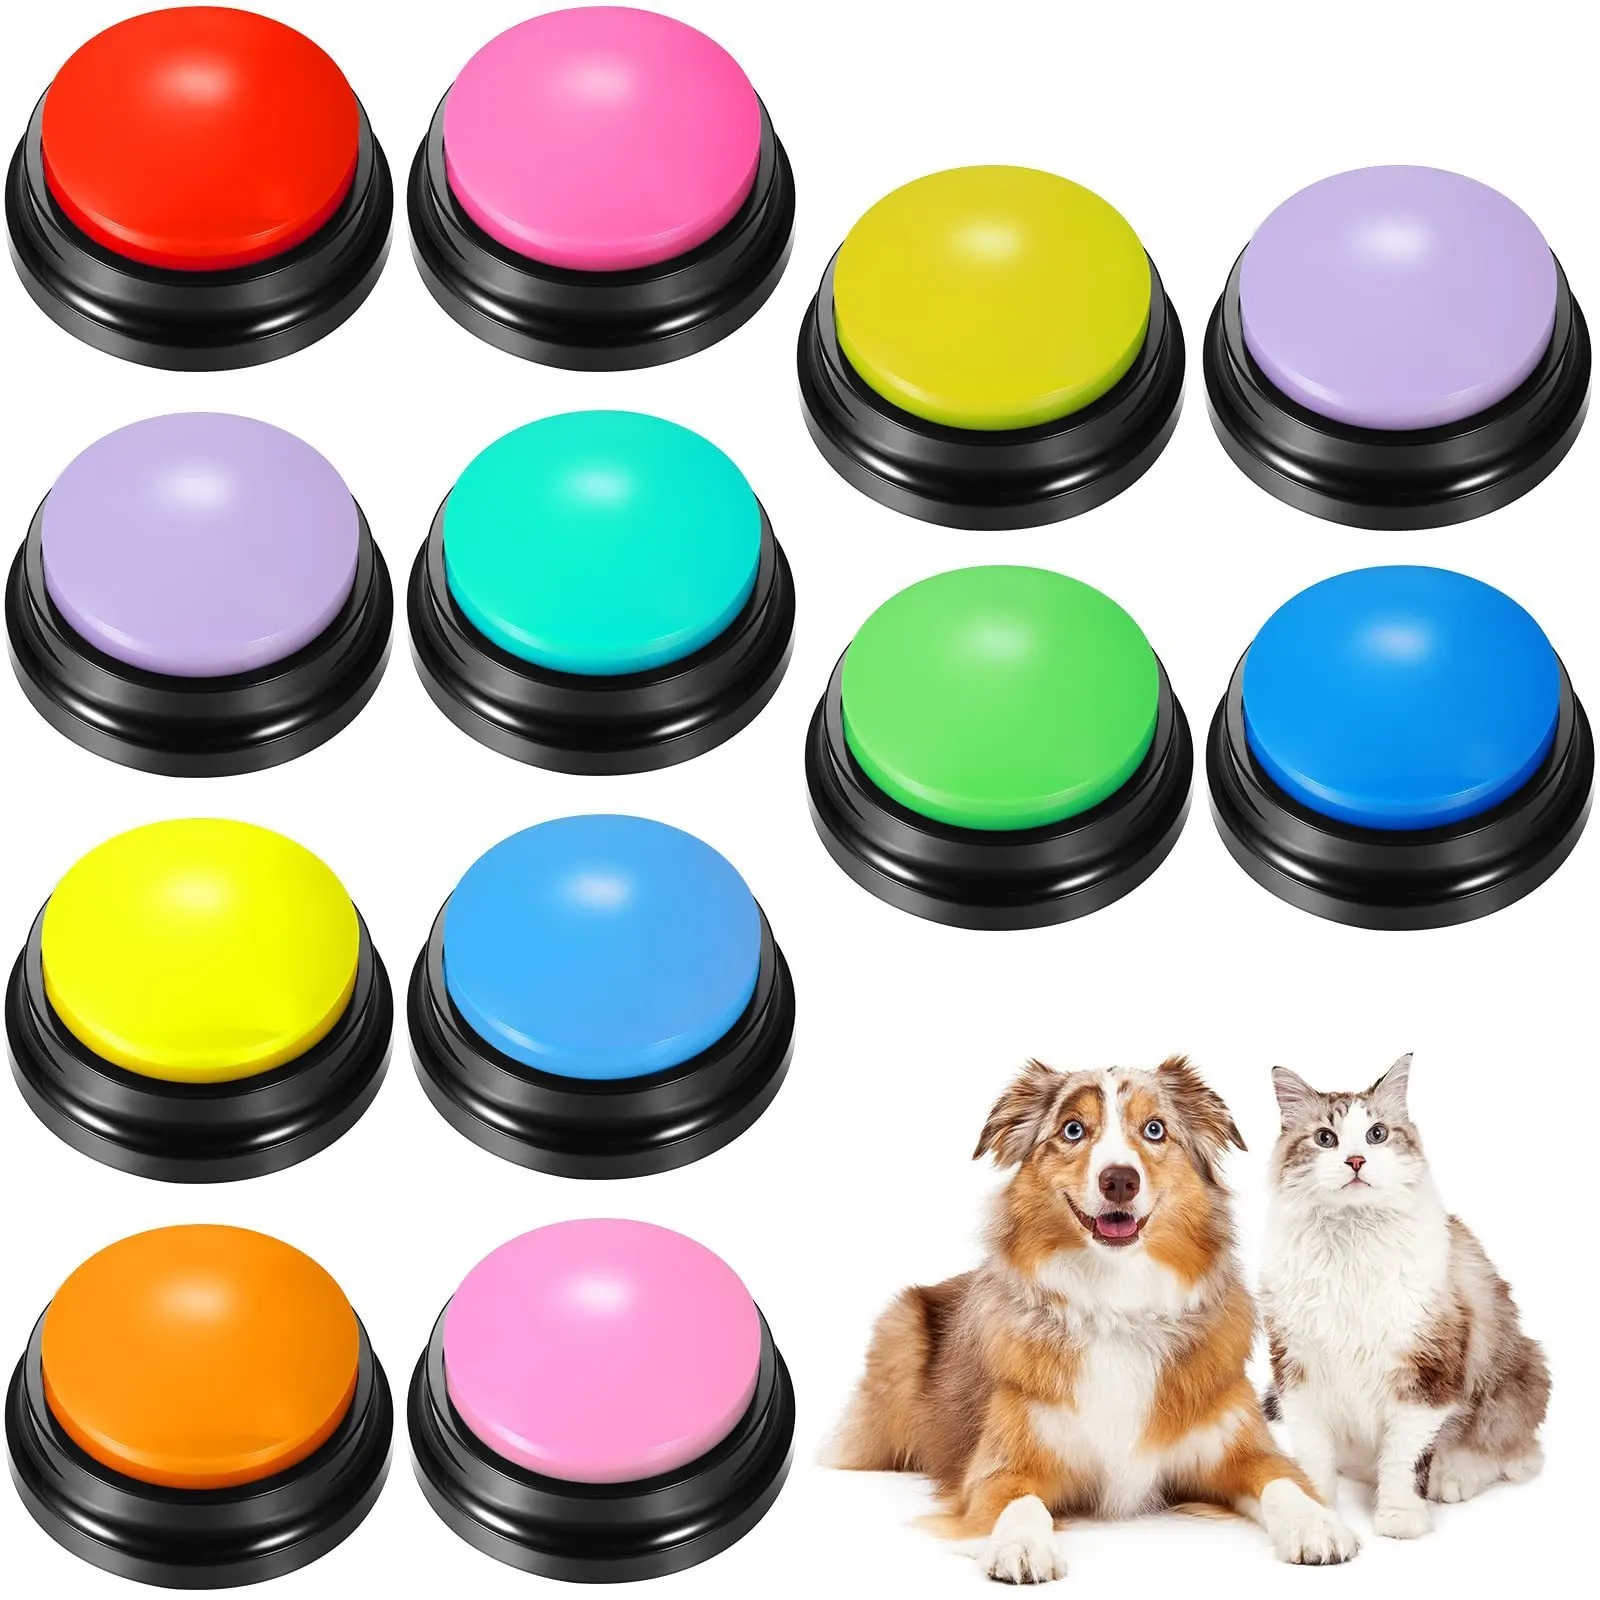 Noise Maker Dog Talking Buttons for Communication Record -knop om te spreken Buzzer Voice Repeater Makers feestspeelgoed Antwoord Game 221018